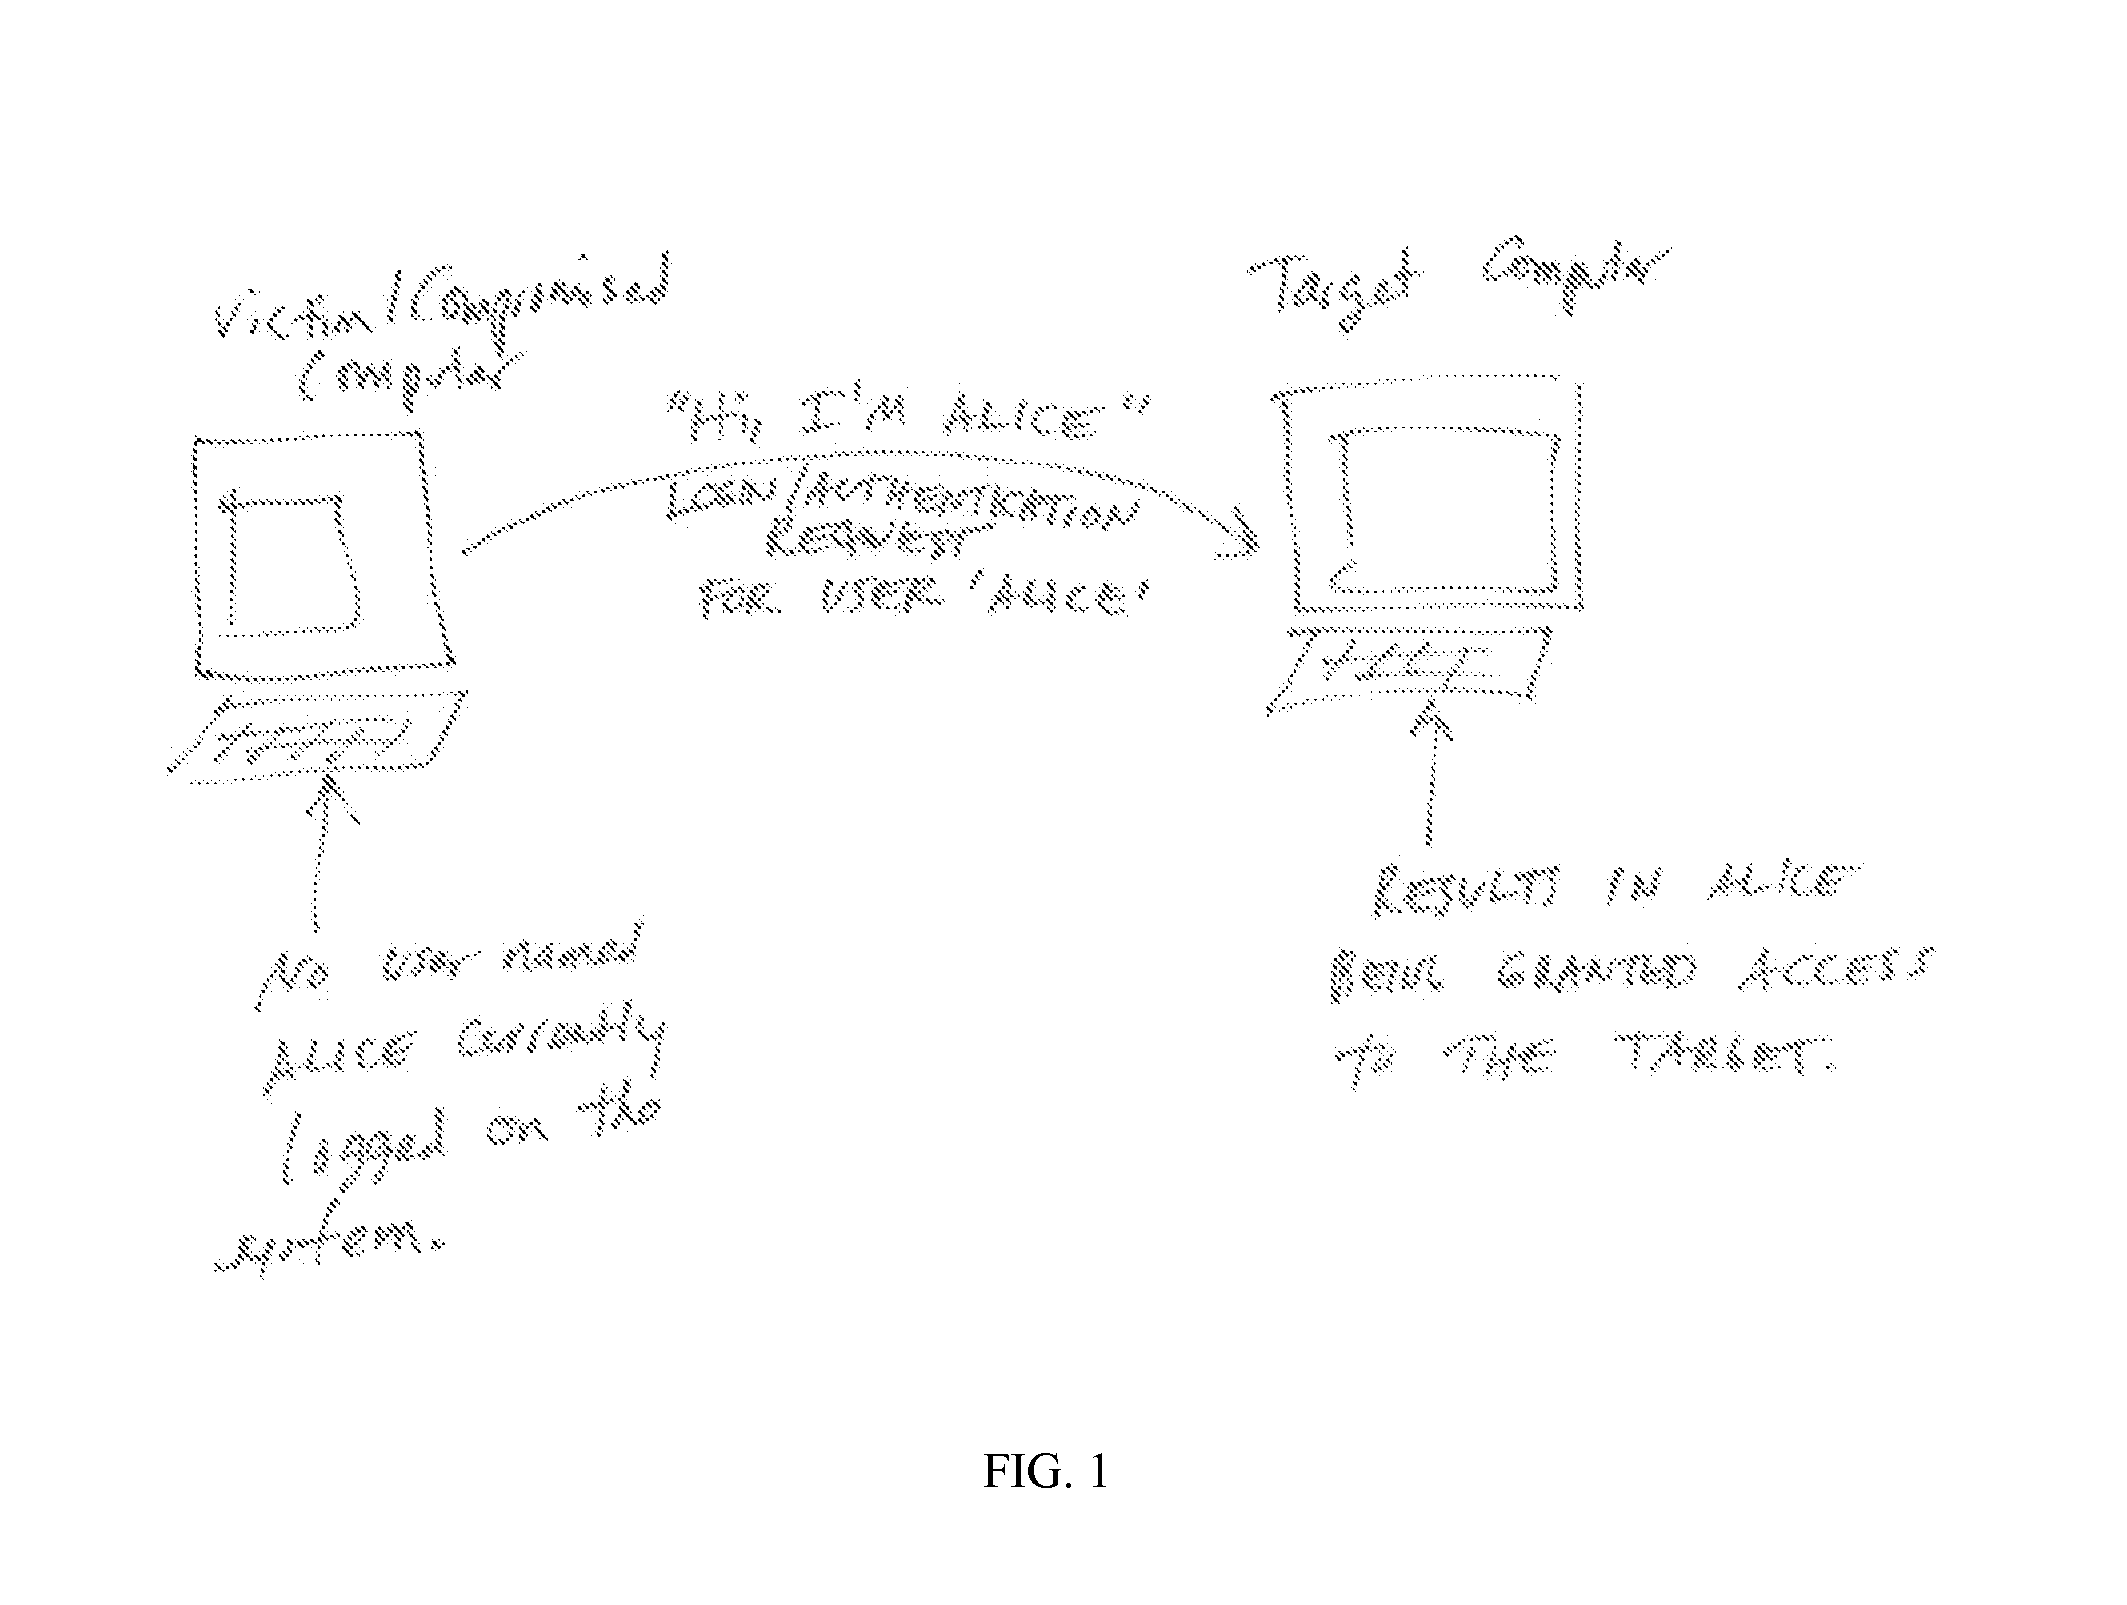 System, apparatus and method for identifying and blocking anomalous or improper use of identity information on computer networks